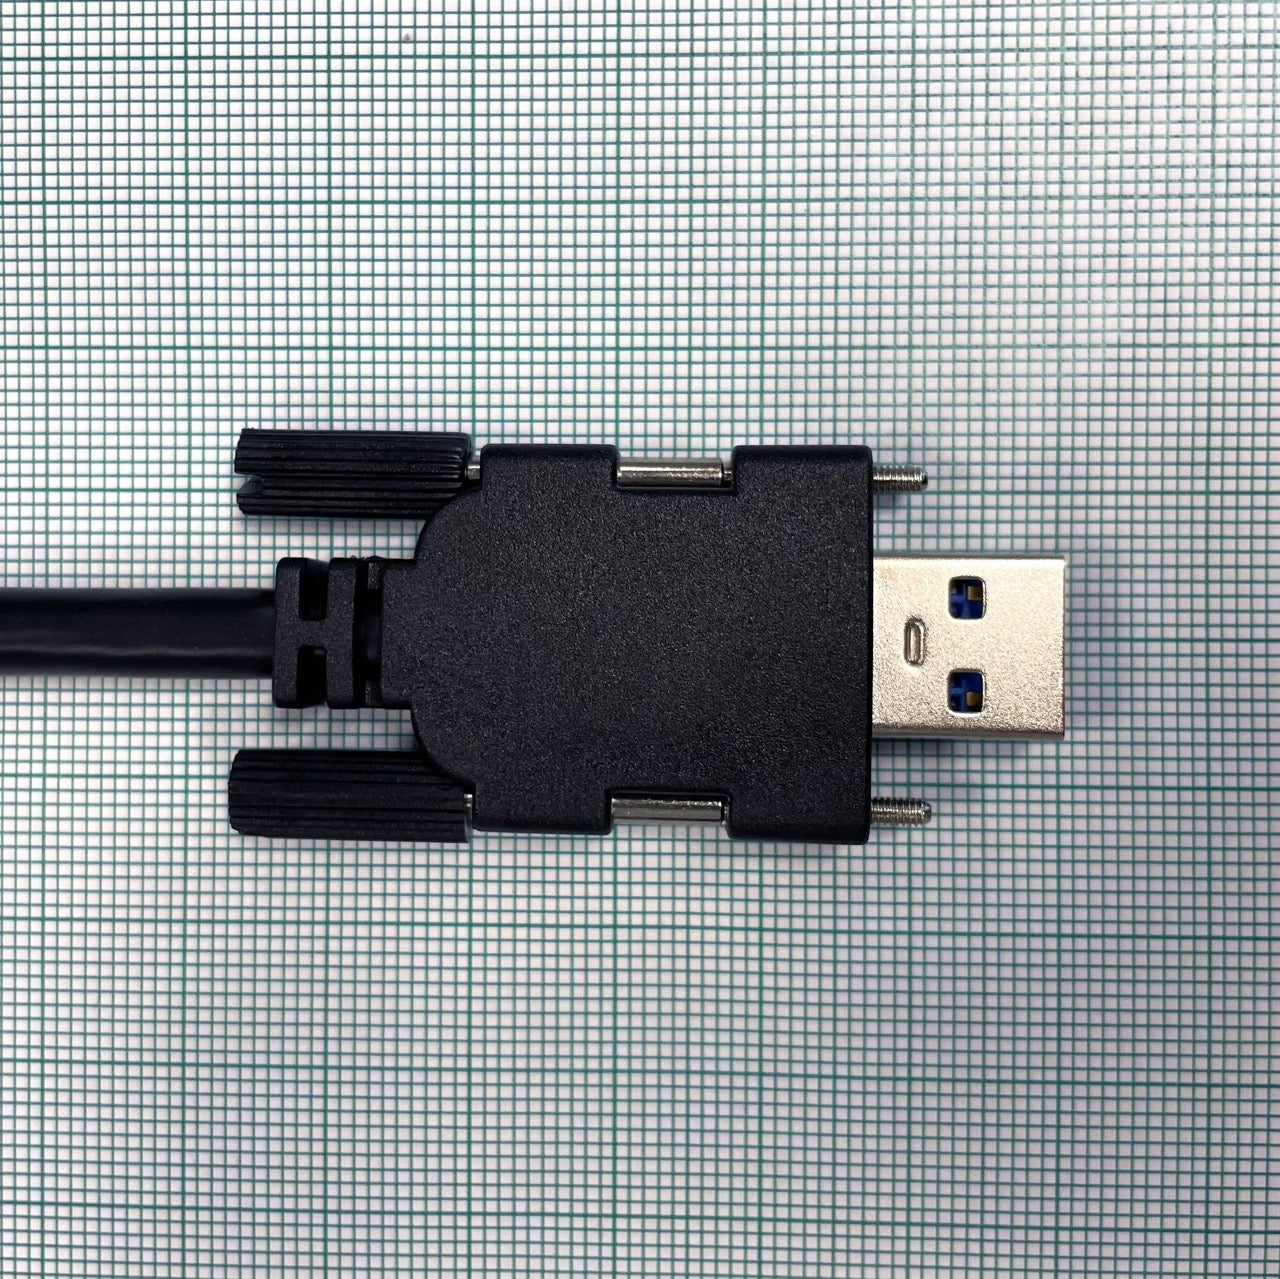 Top view of Type A USB 3.0 Vision screw lock connector